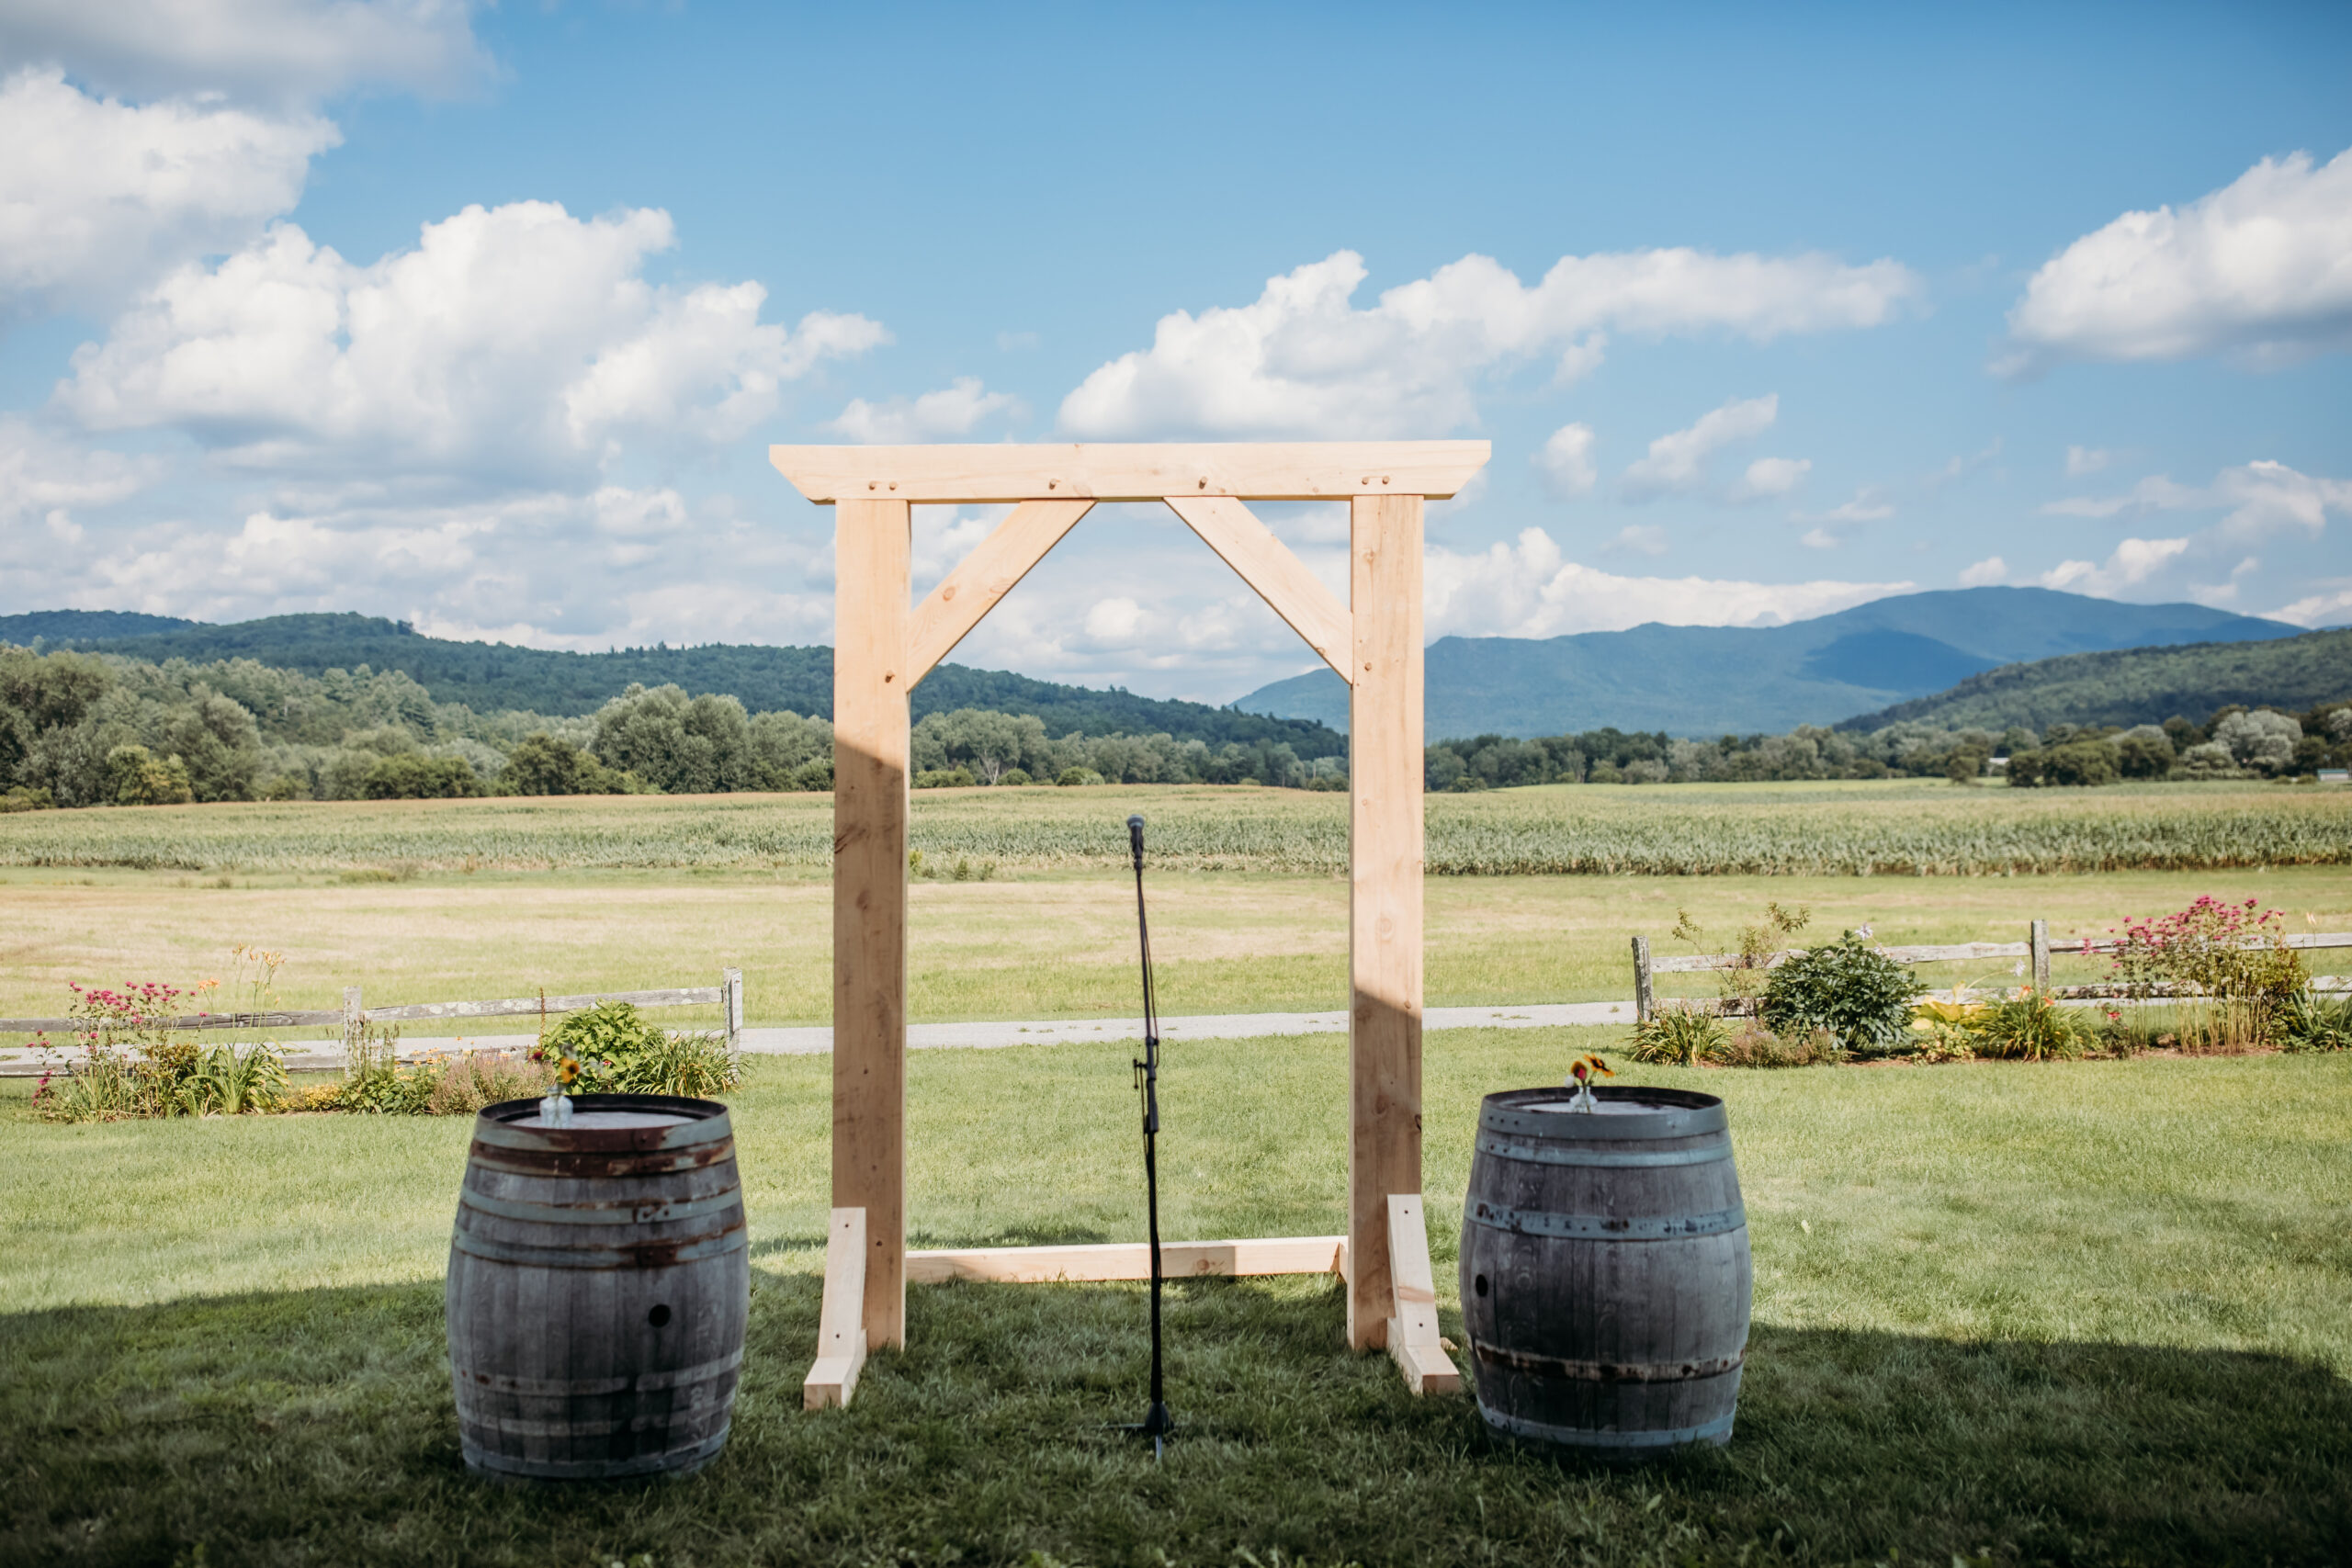 A simple, handcrafted wooden wedding arbor with rolling mountain views behind it at The Barn at Boyden Farm's summer wedding venue in Vermont